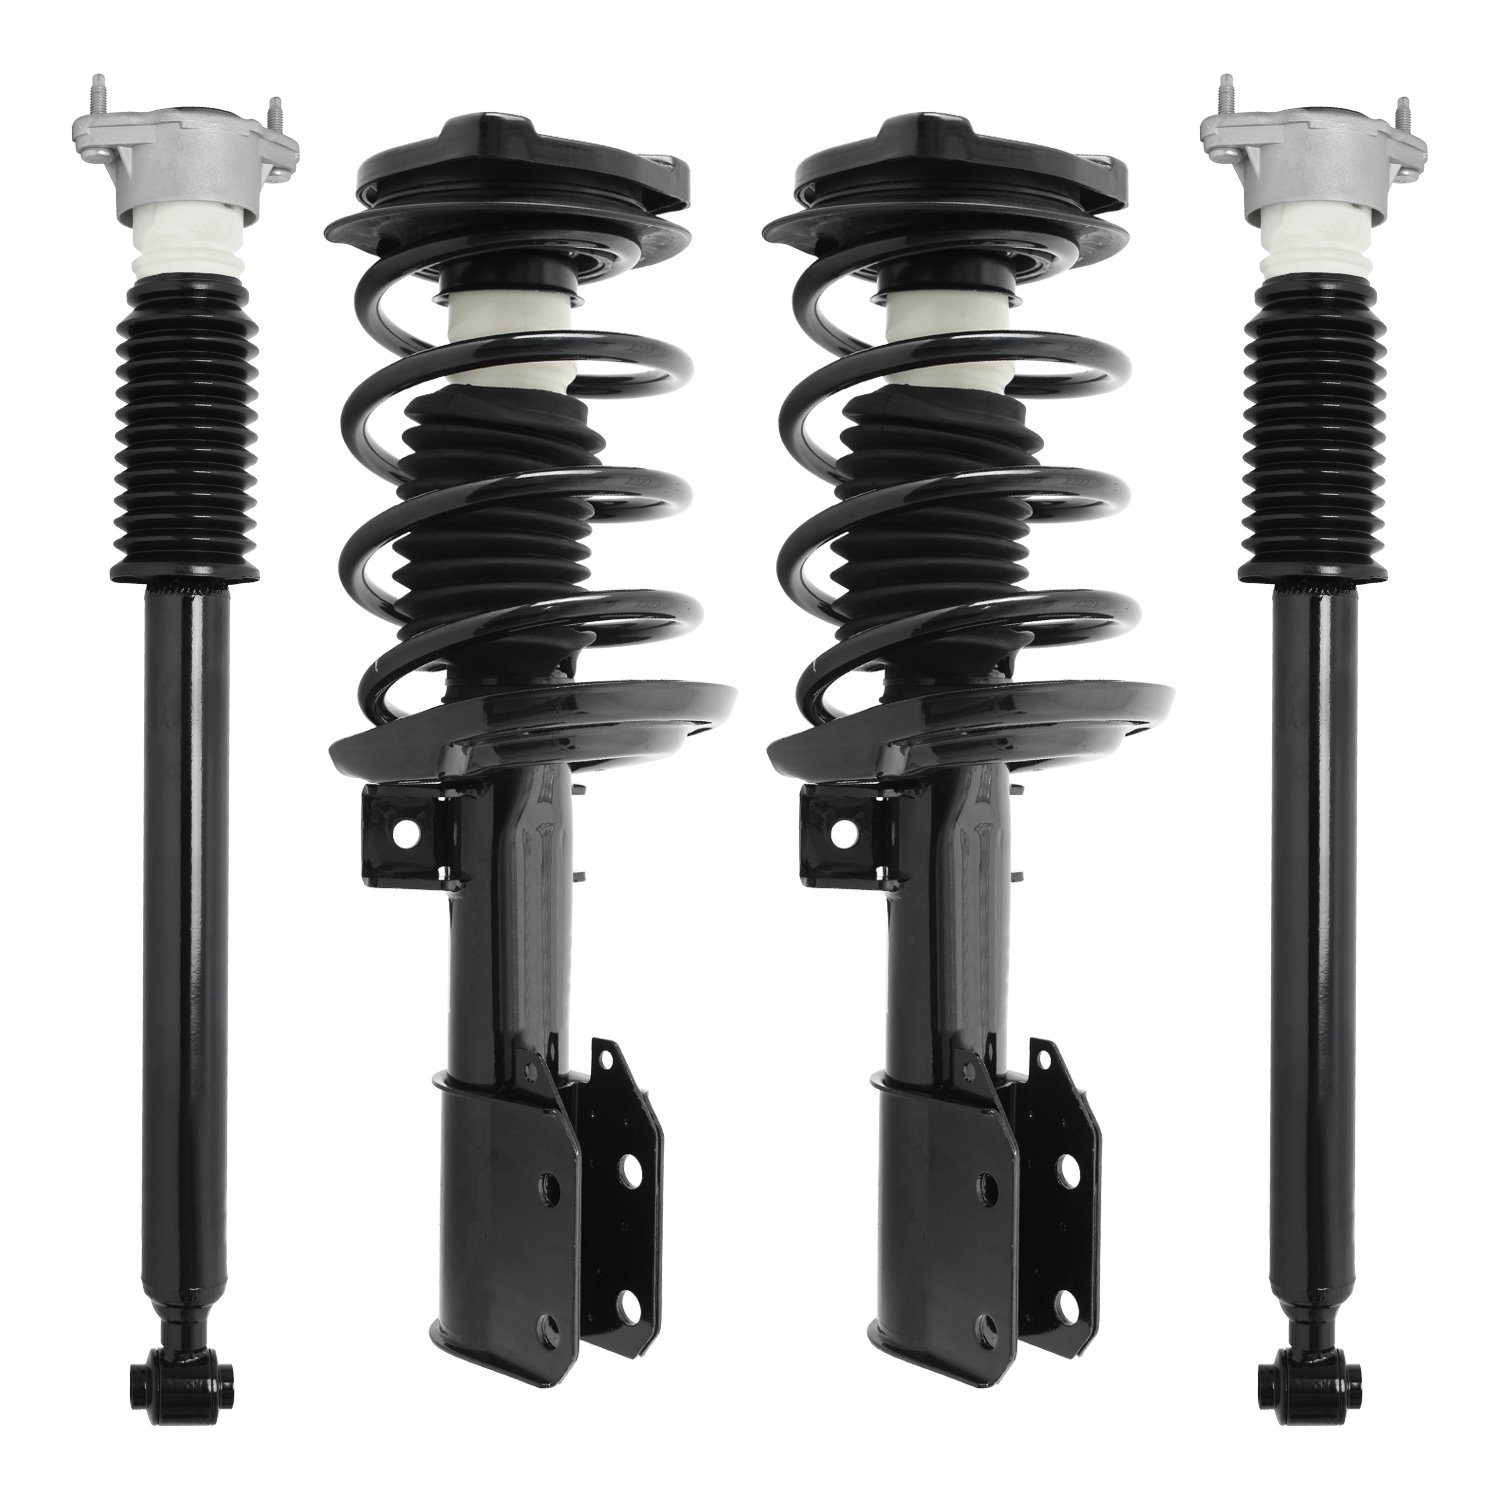 4-11480-254870-001 Front & Rear Suspension Strut & Coil Spring Assembly Fits Select Mercedes-Benz